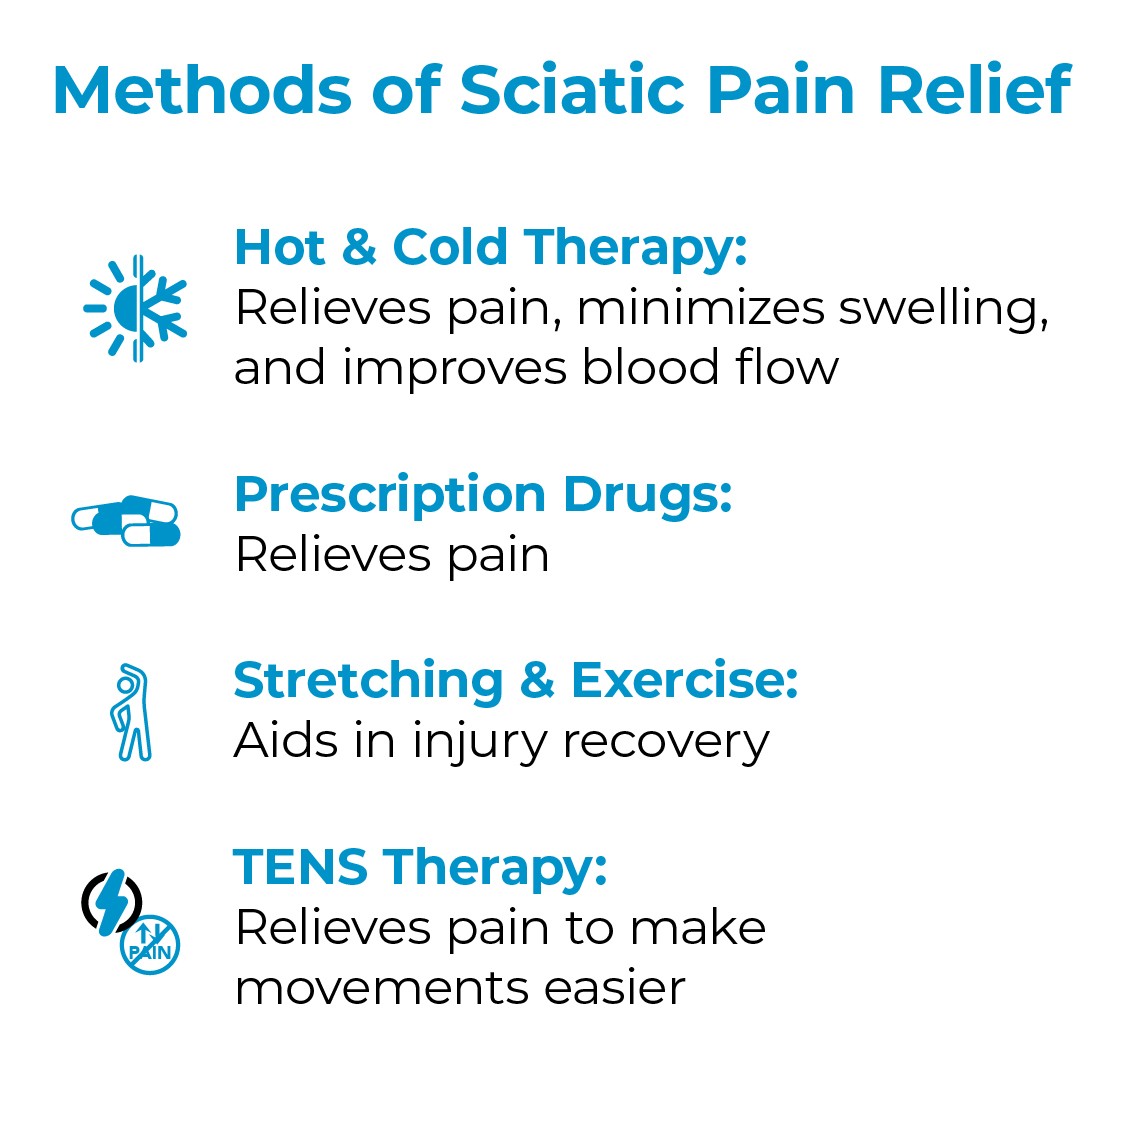 How To Use a TENS Unit For Sciatica Pain [Recommended Tips 2020]